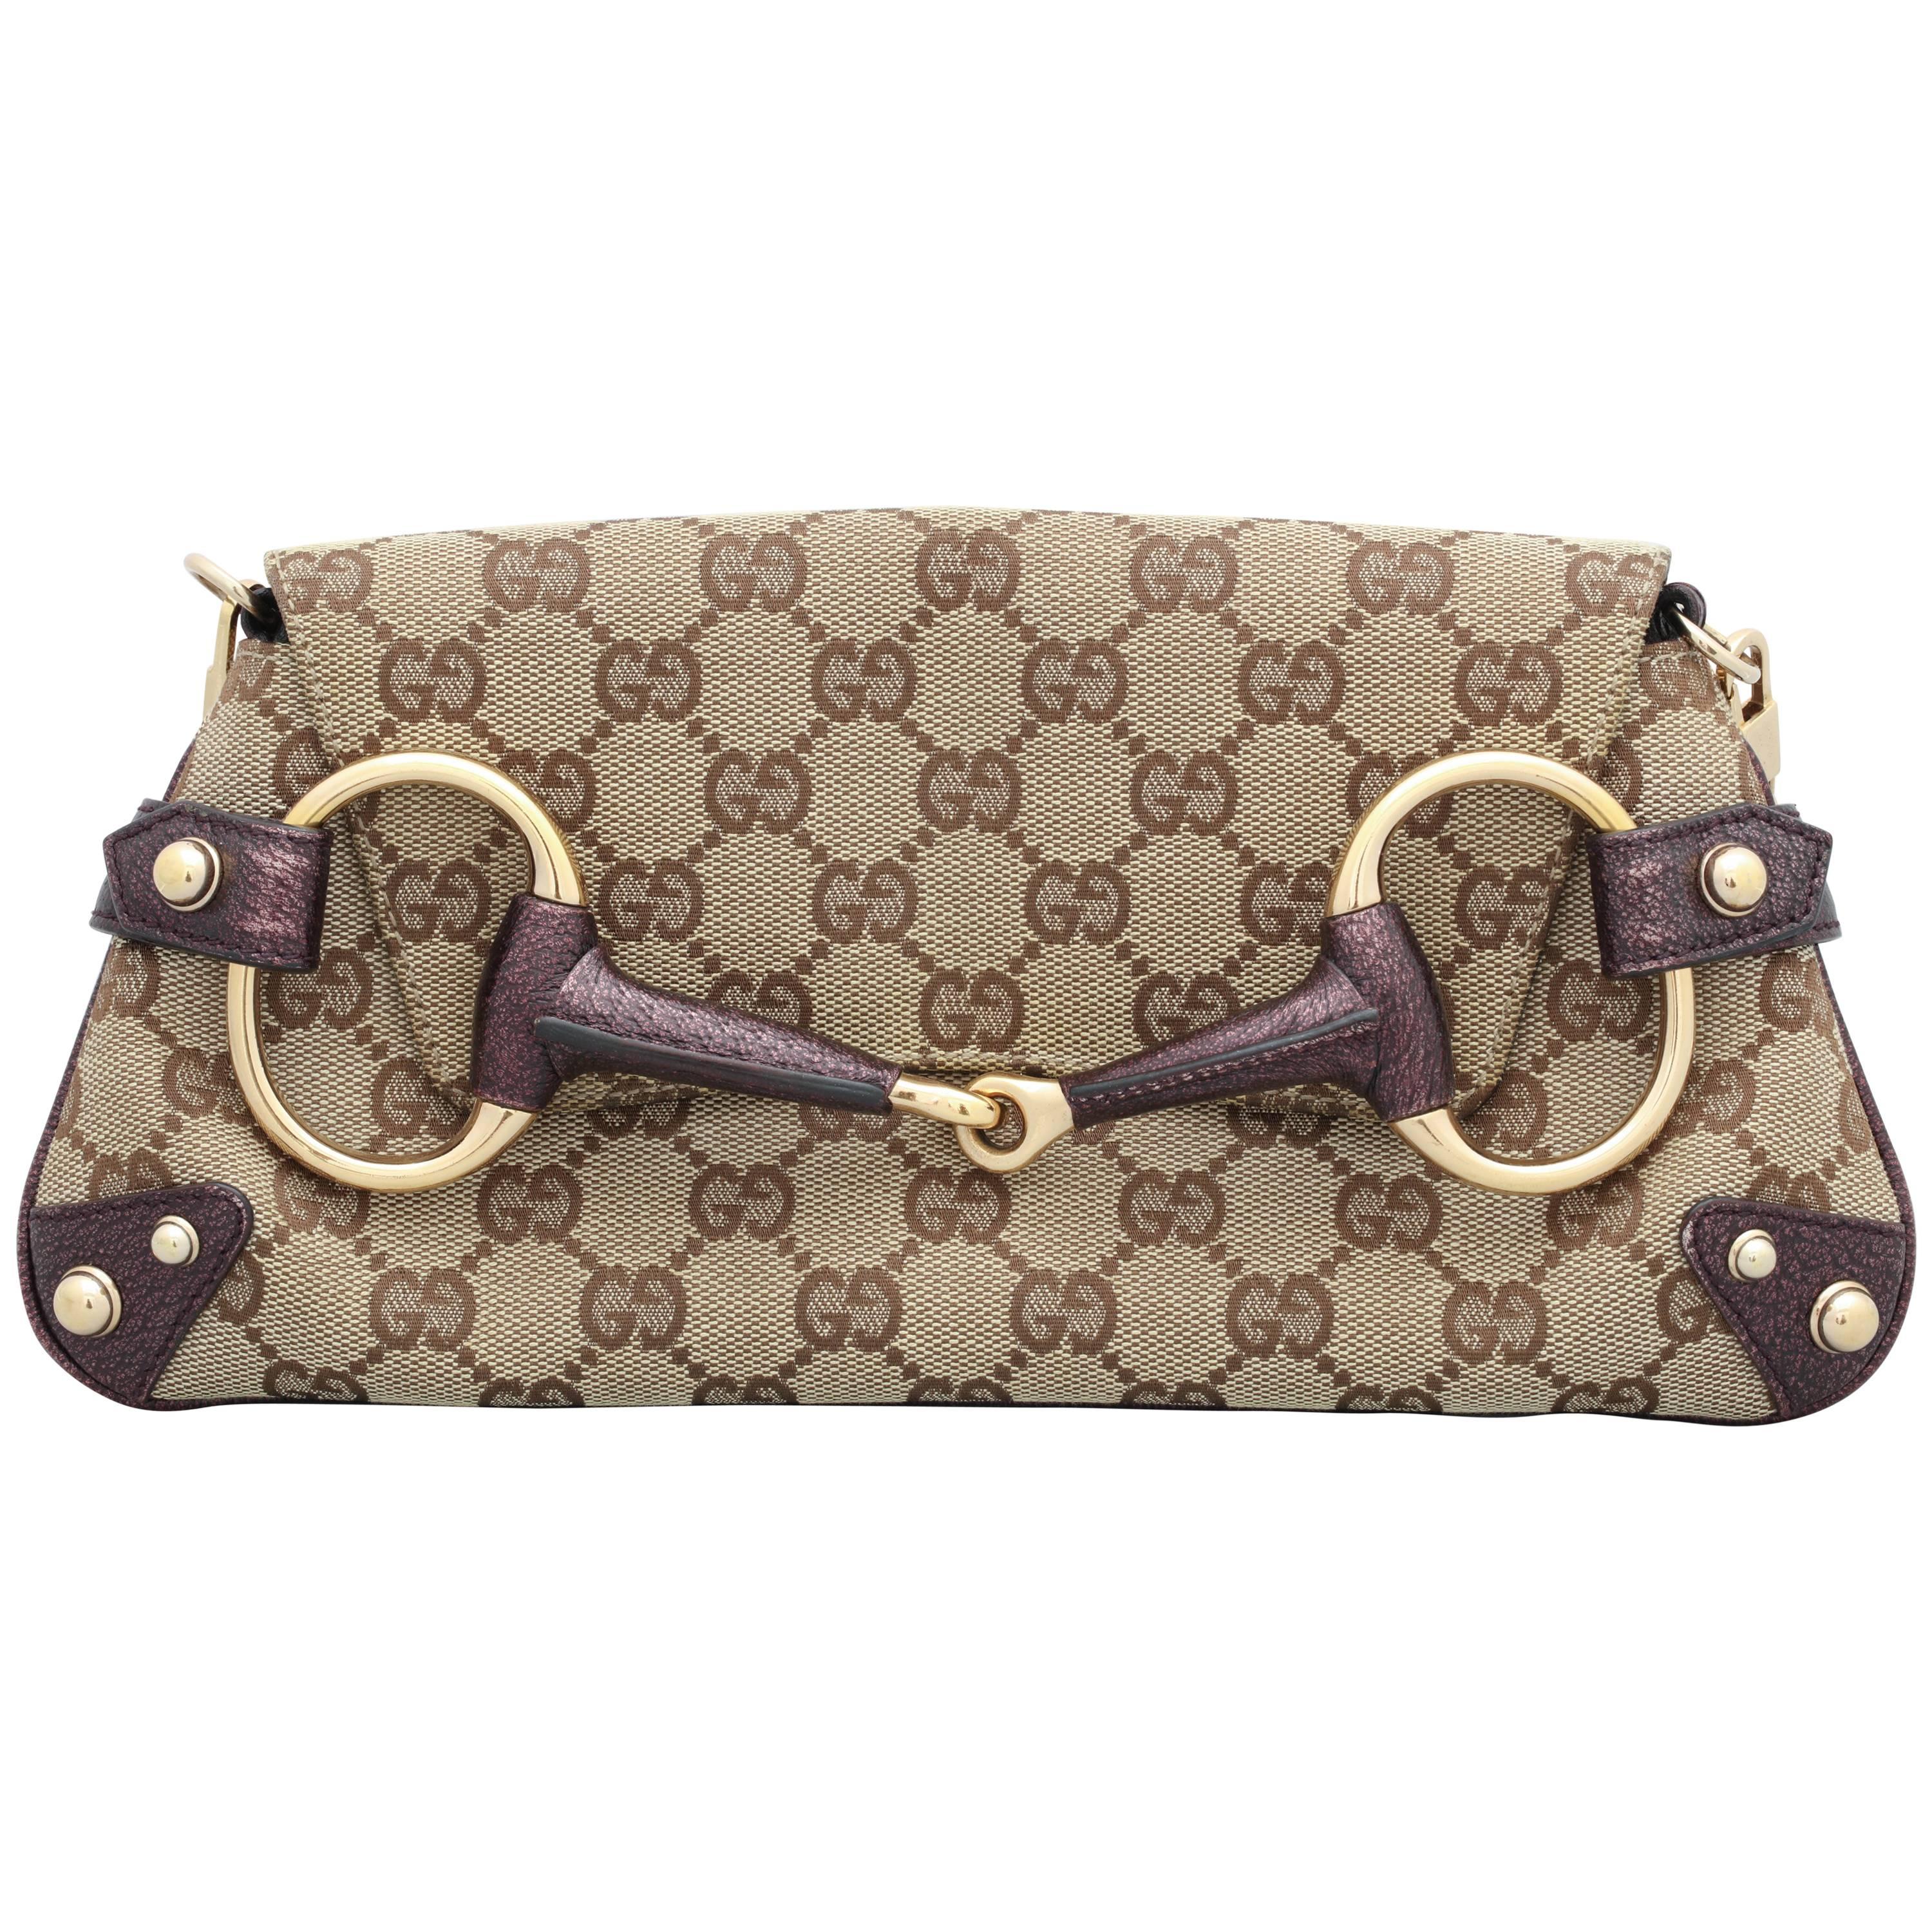 Beautiful Tom Ford for Gucci chain bag with metallic purple and studs details. 